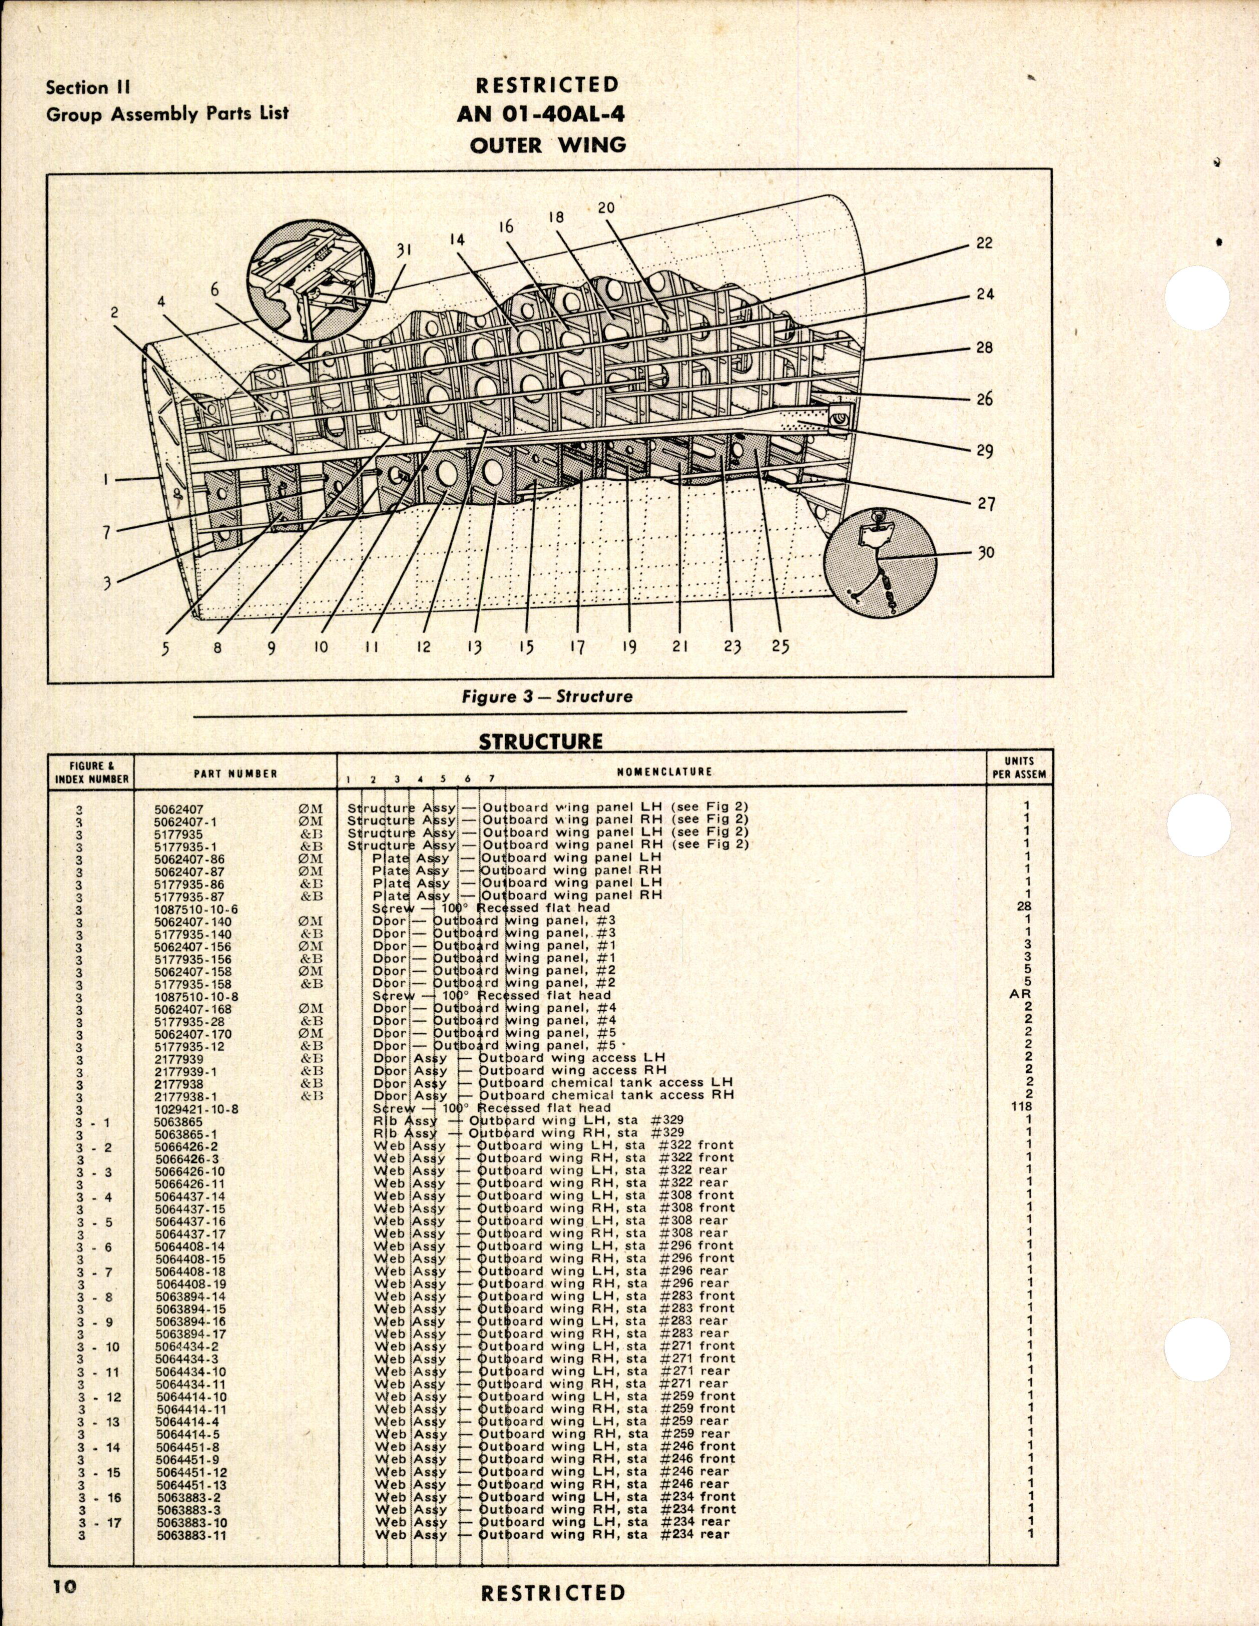 Sample page 6 from AirCorps Library document: Parts Catalog for Models A-20G and A-20J